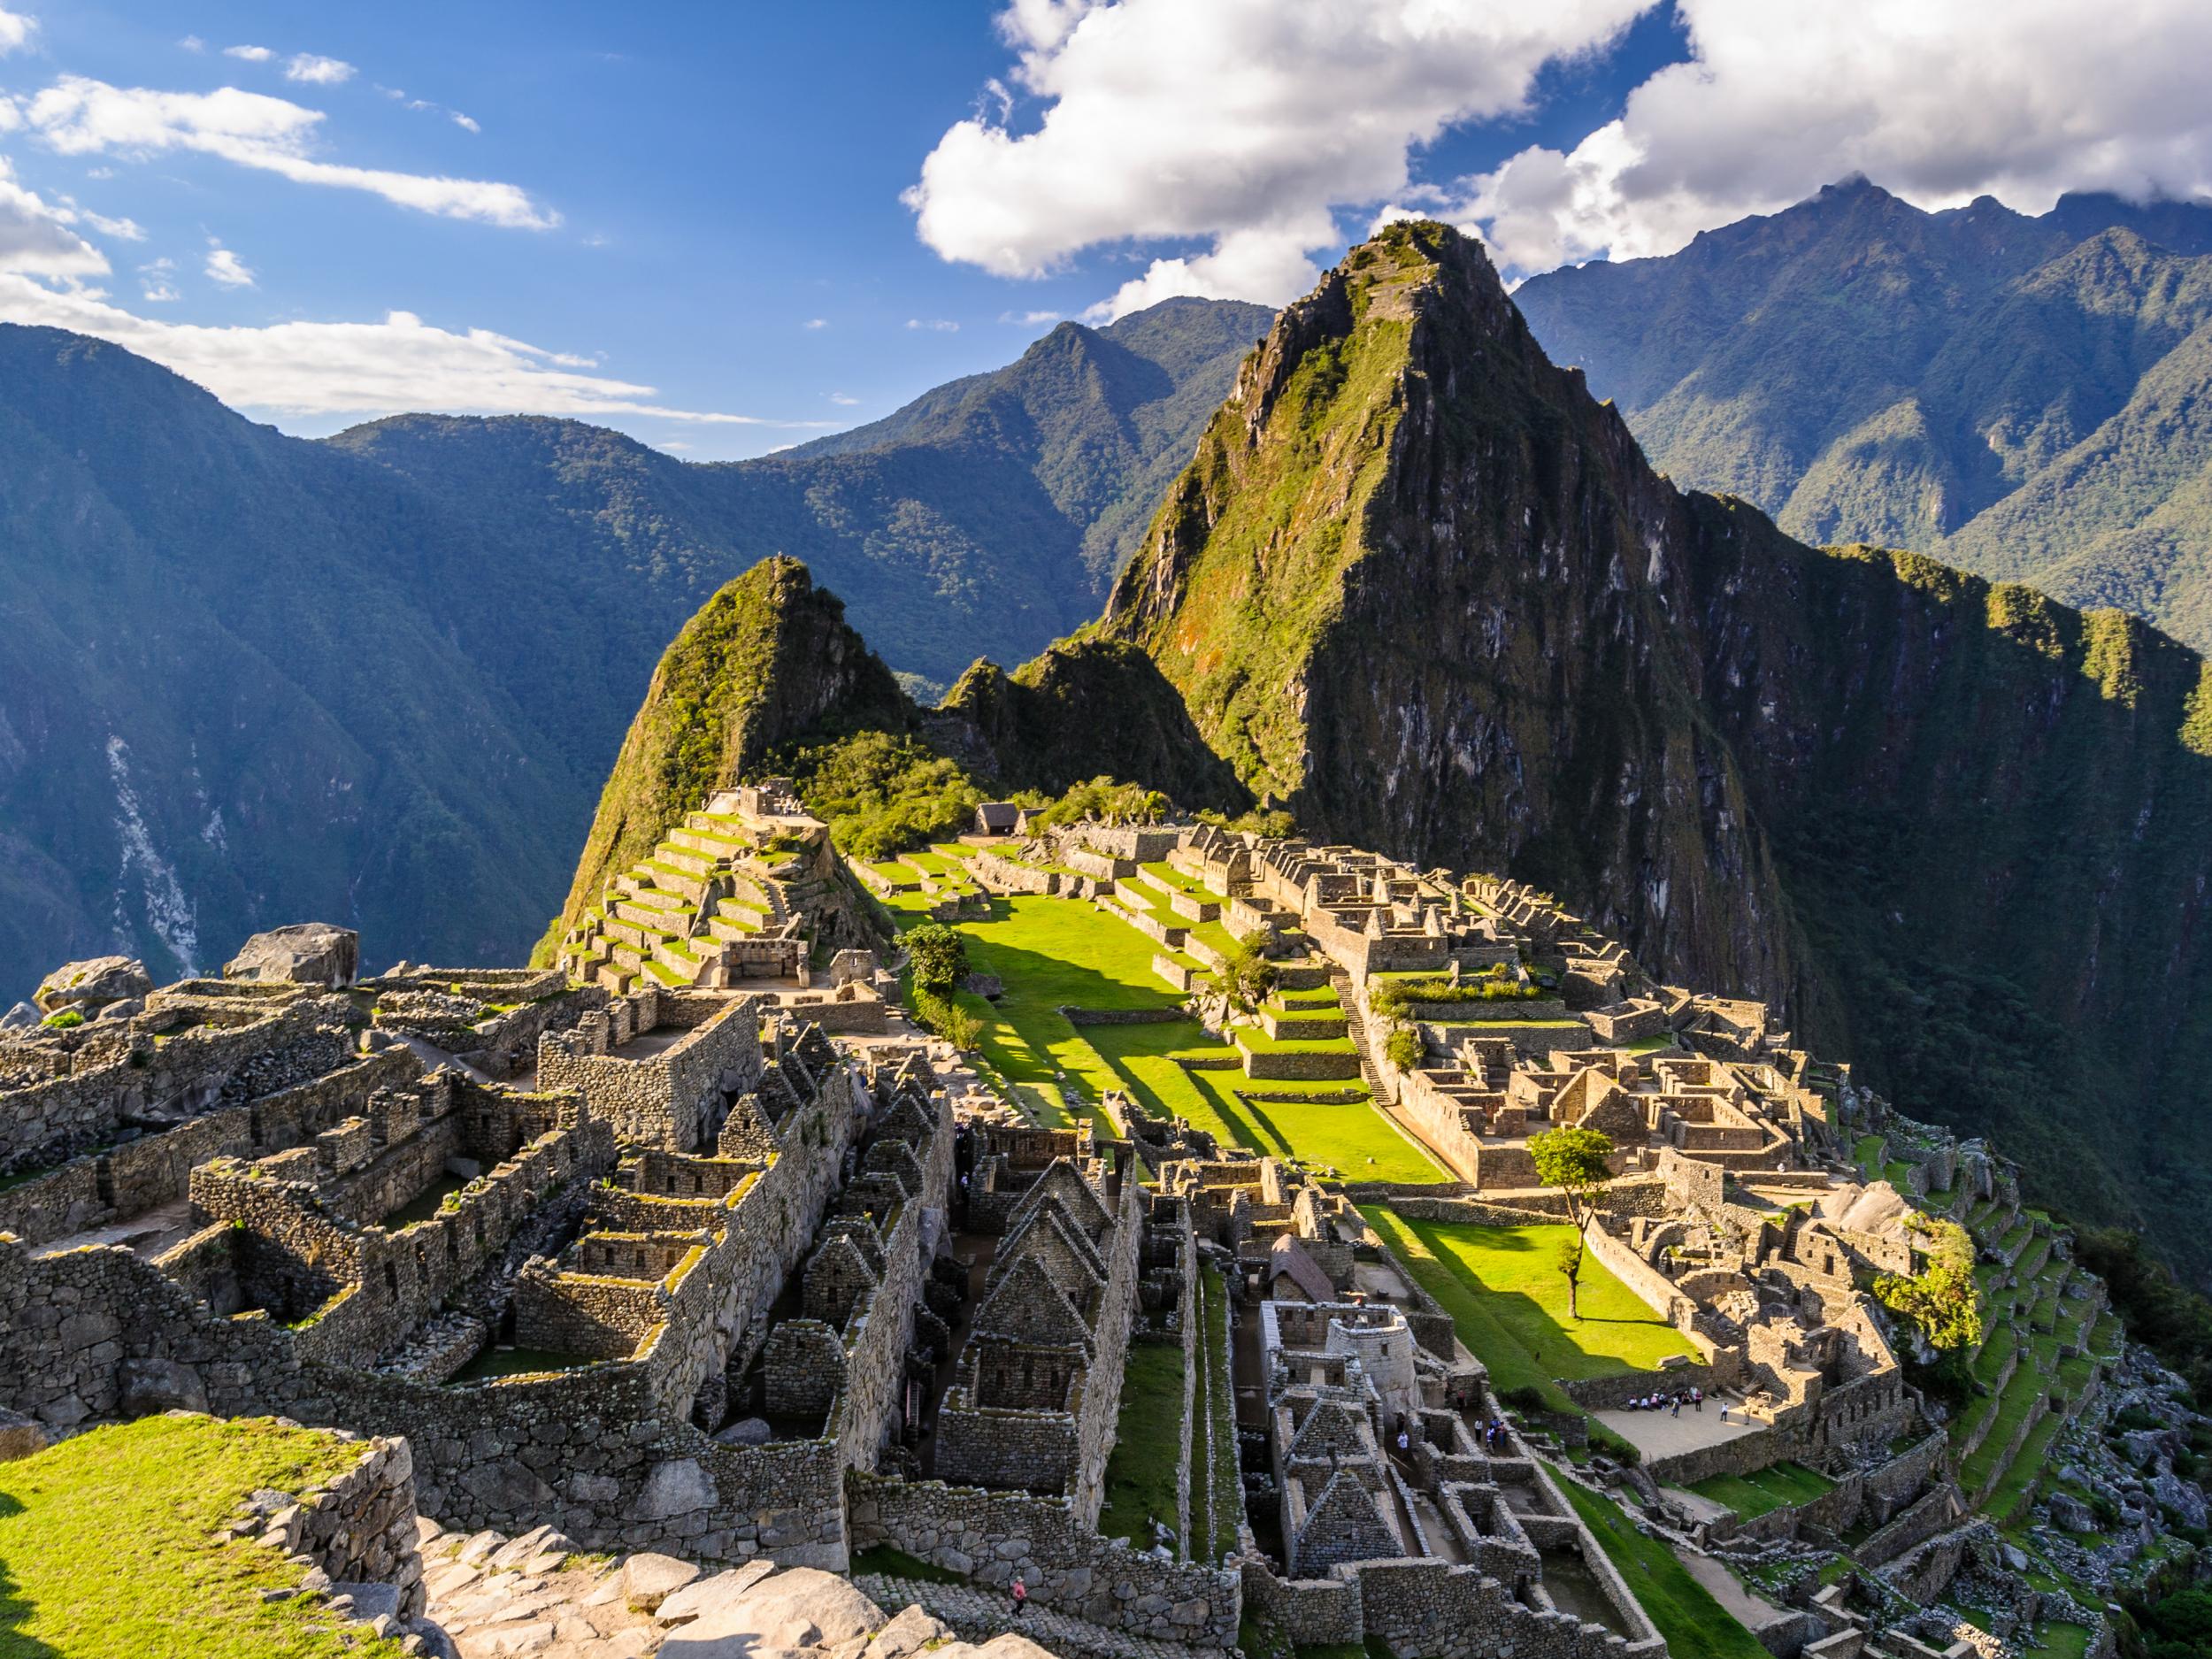 Machu Picchu is one of the Seven Wonders of the World